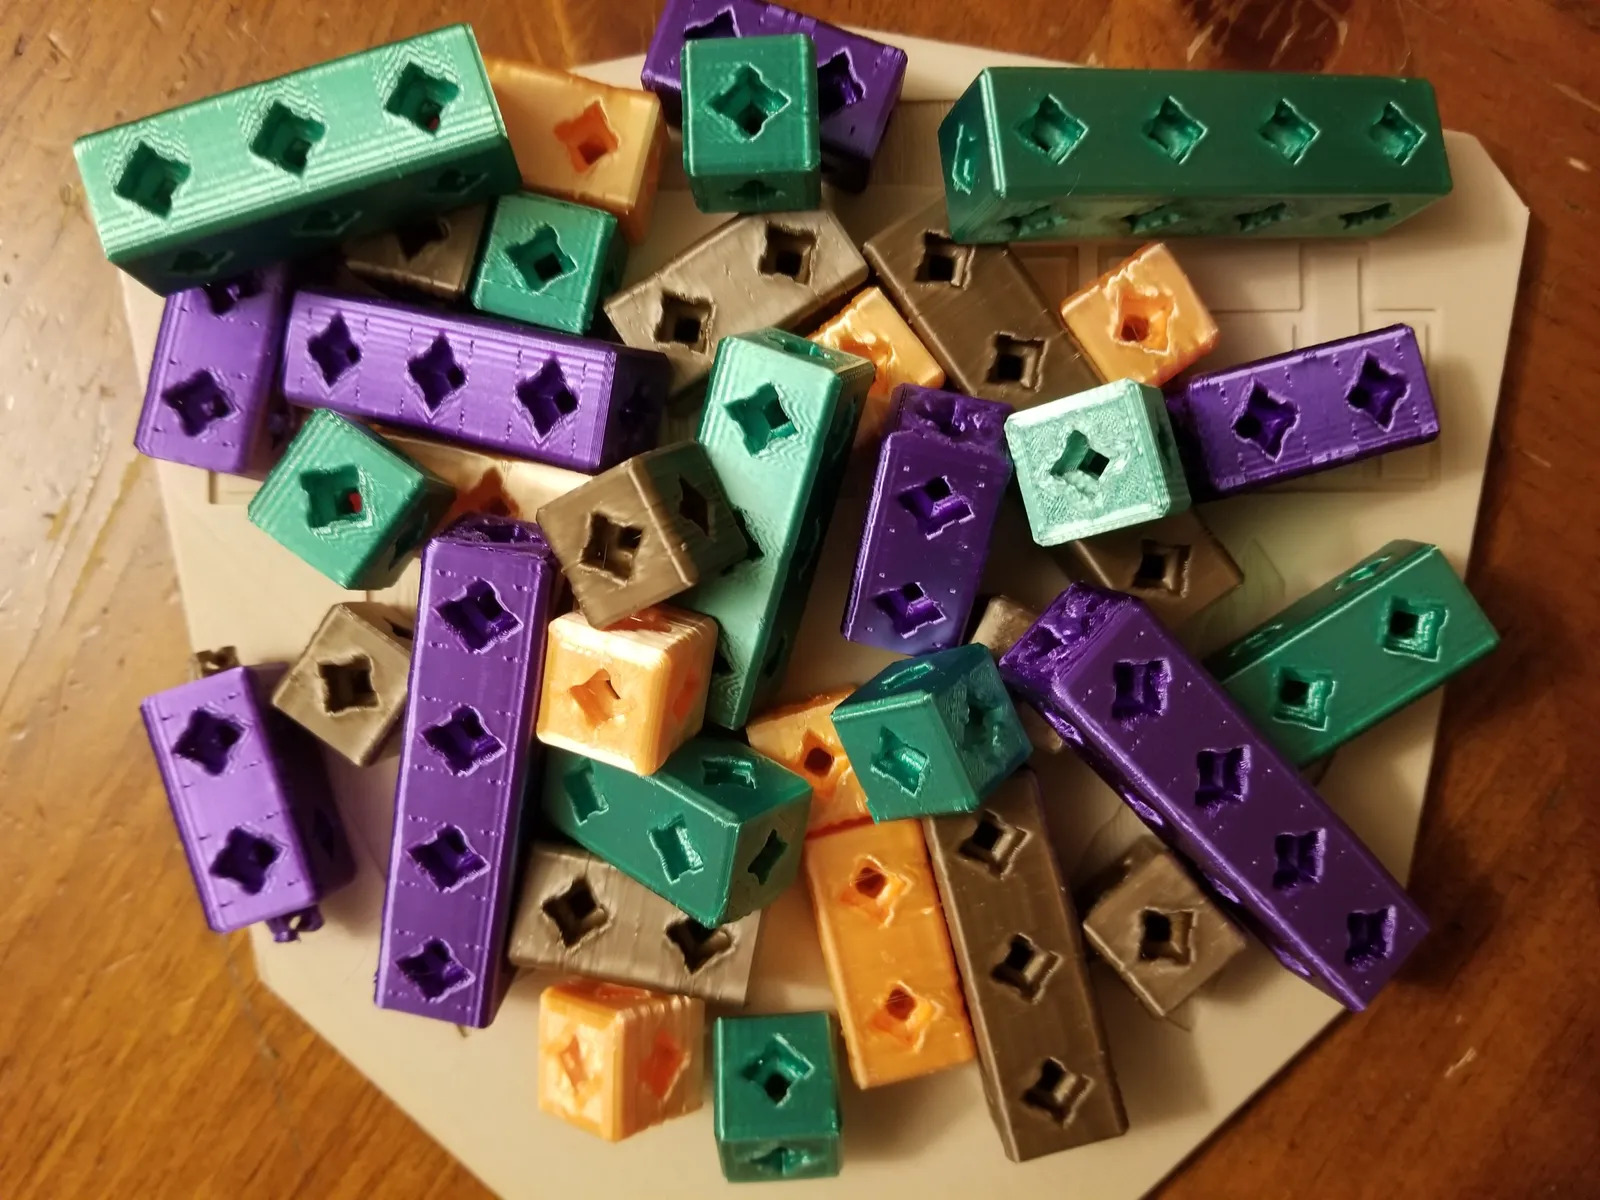 These 3D Printed “Not Lego” Are Addictive